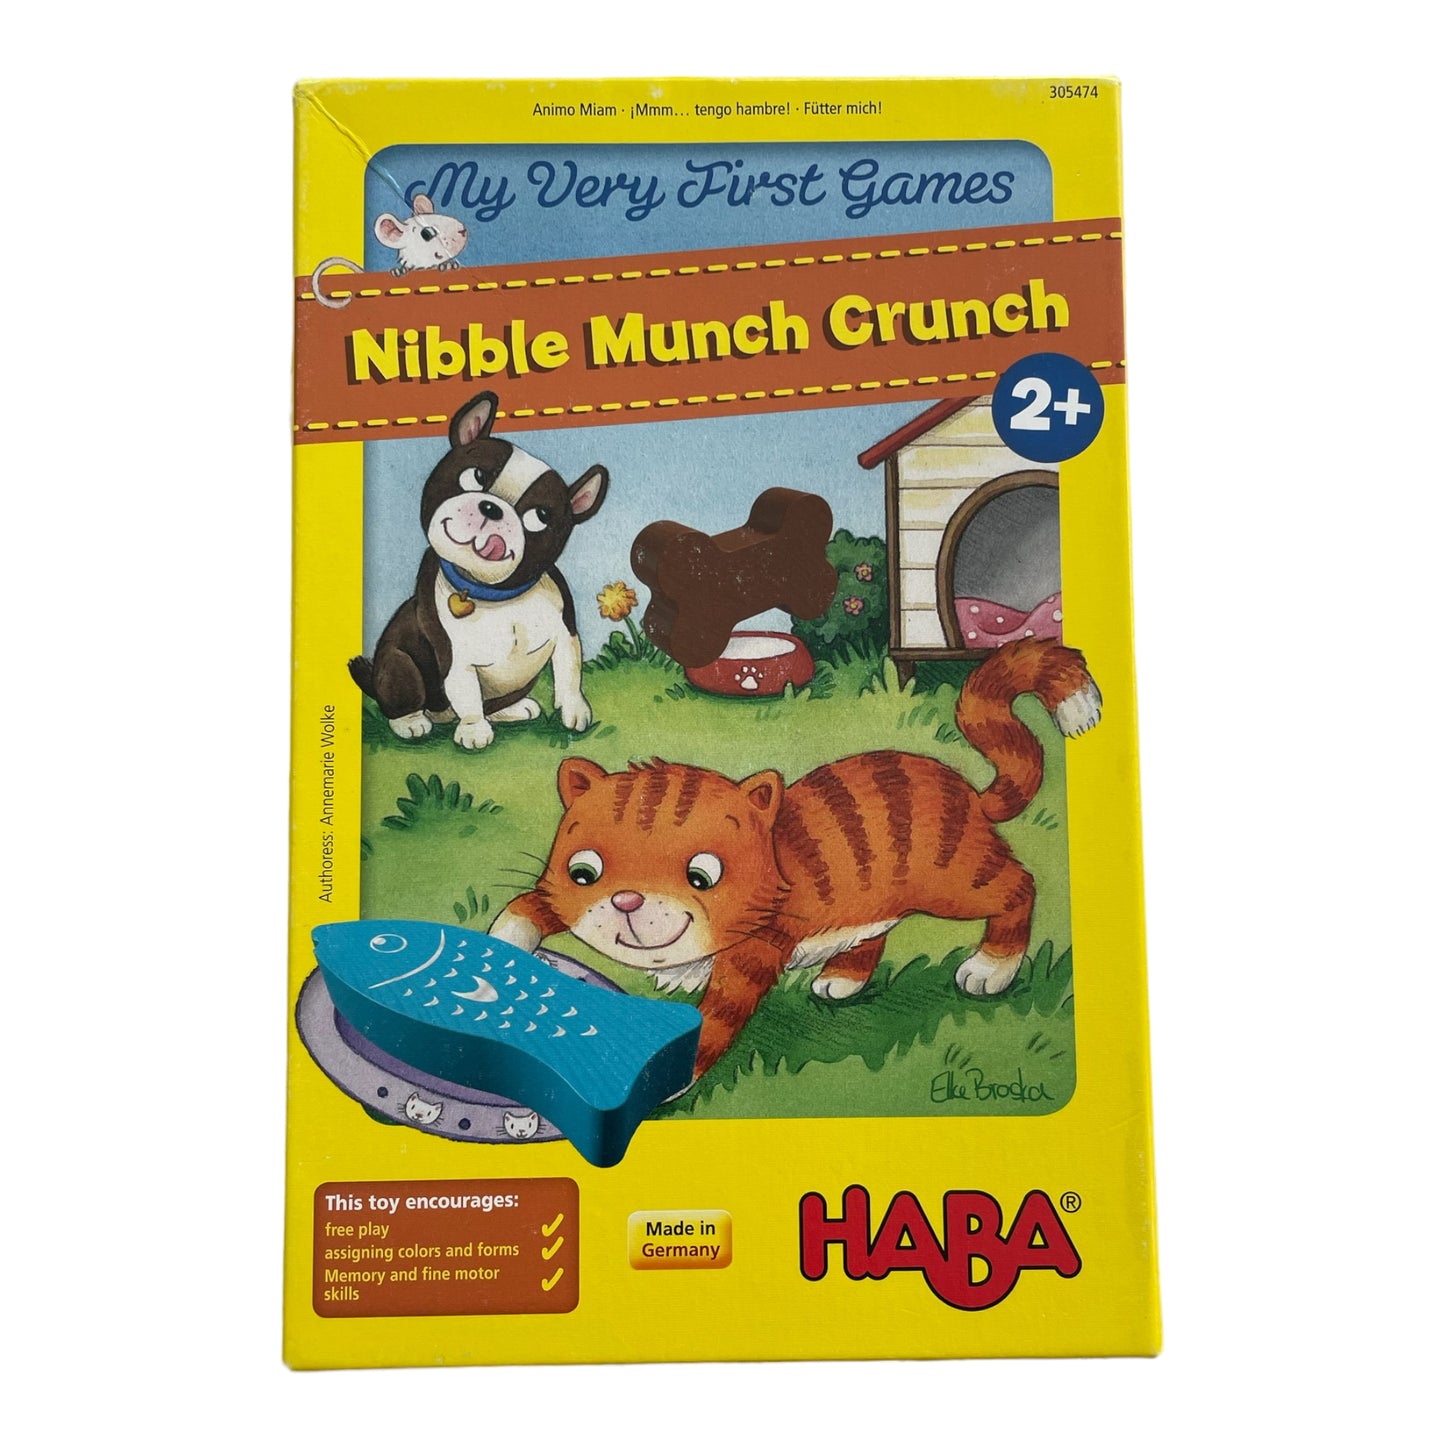 Haba Nibble Munch Crunch Game - My very first games